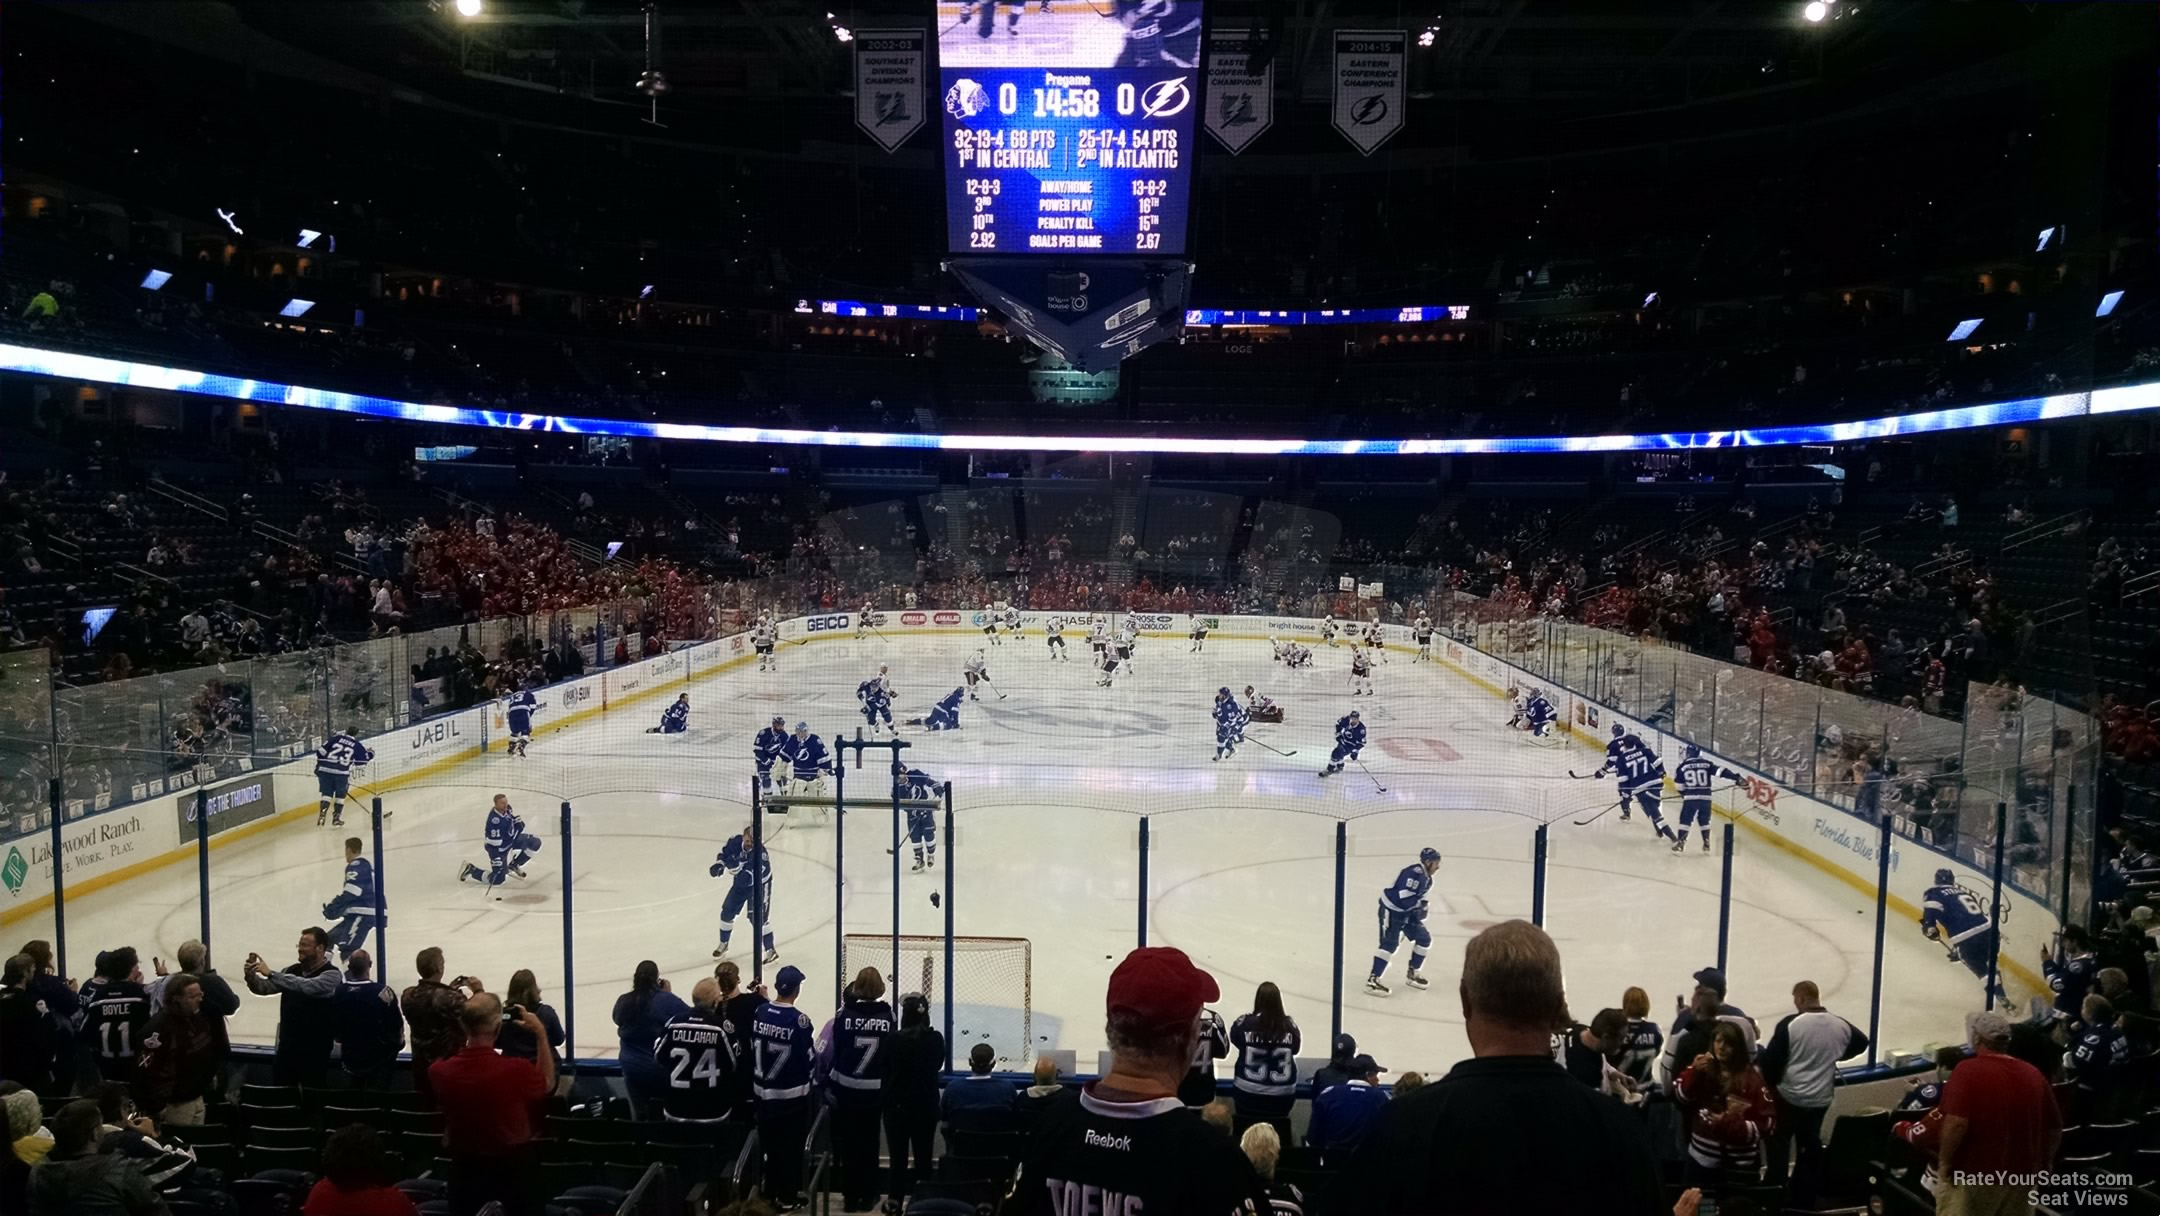 section 108, row p seat view  for hockey - amalie arena